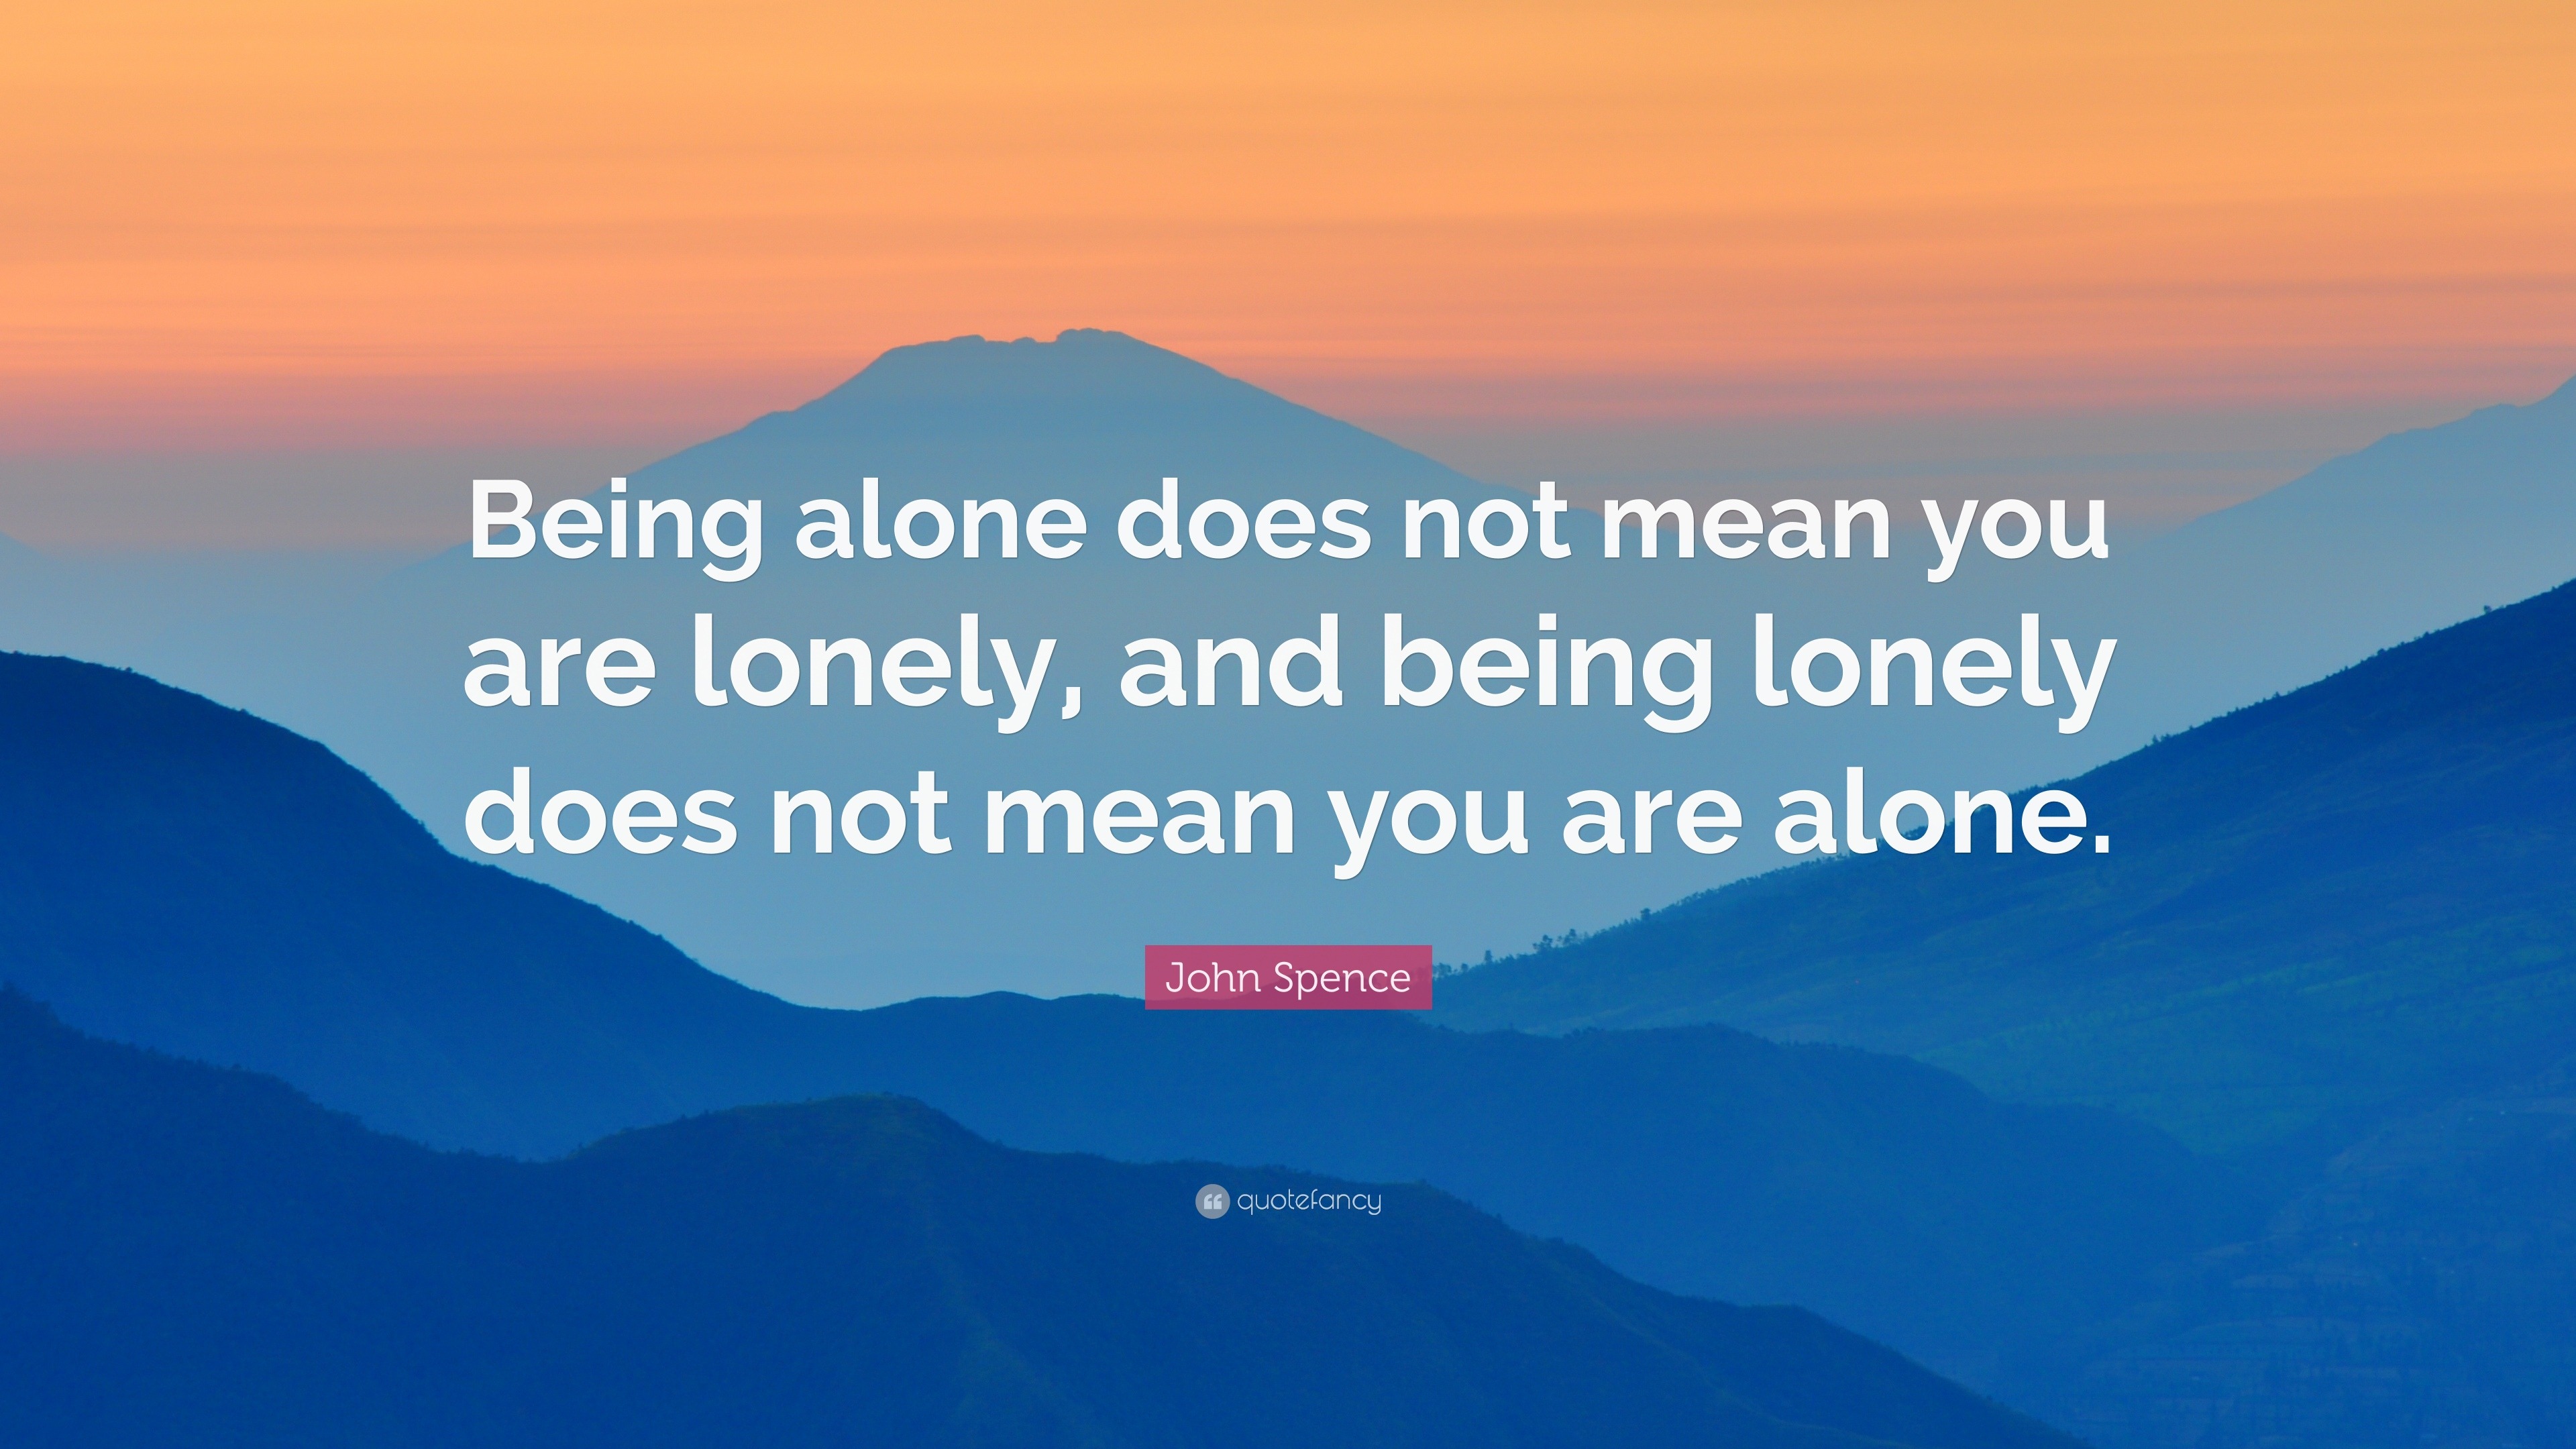 John Spence Quote: “Being alone does not mean you are lonely, and being ...